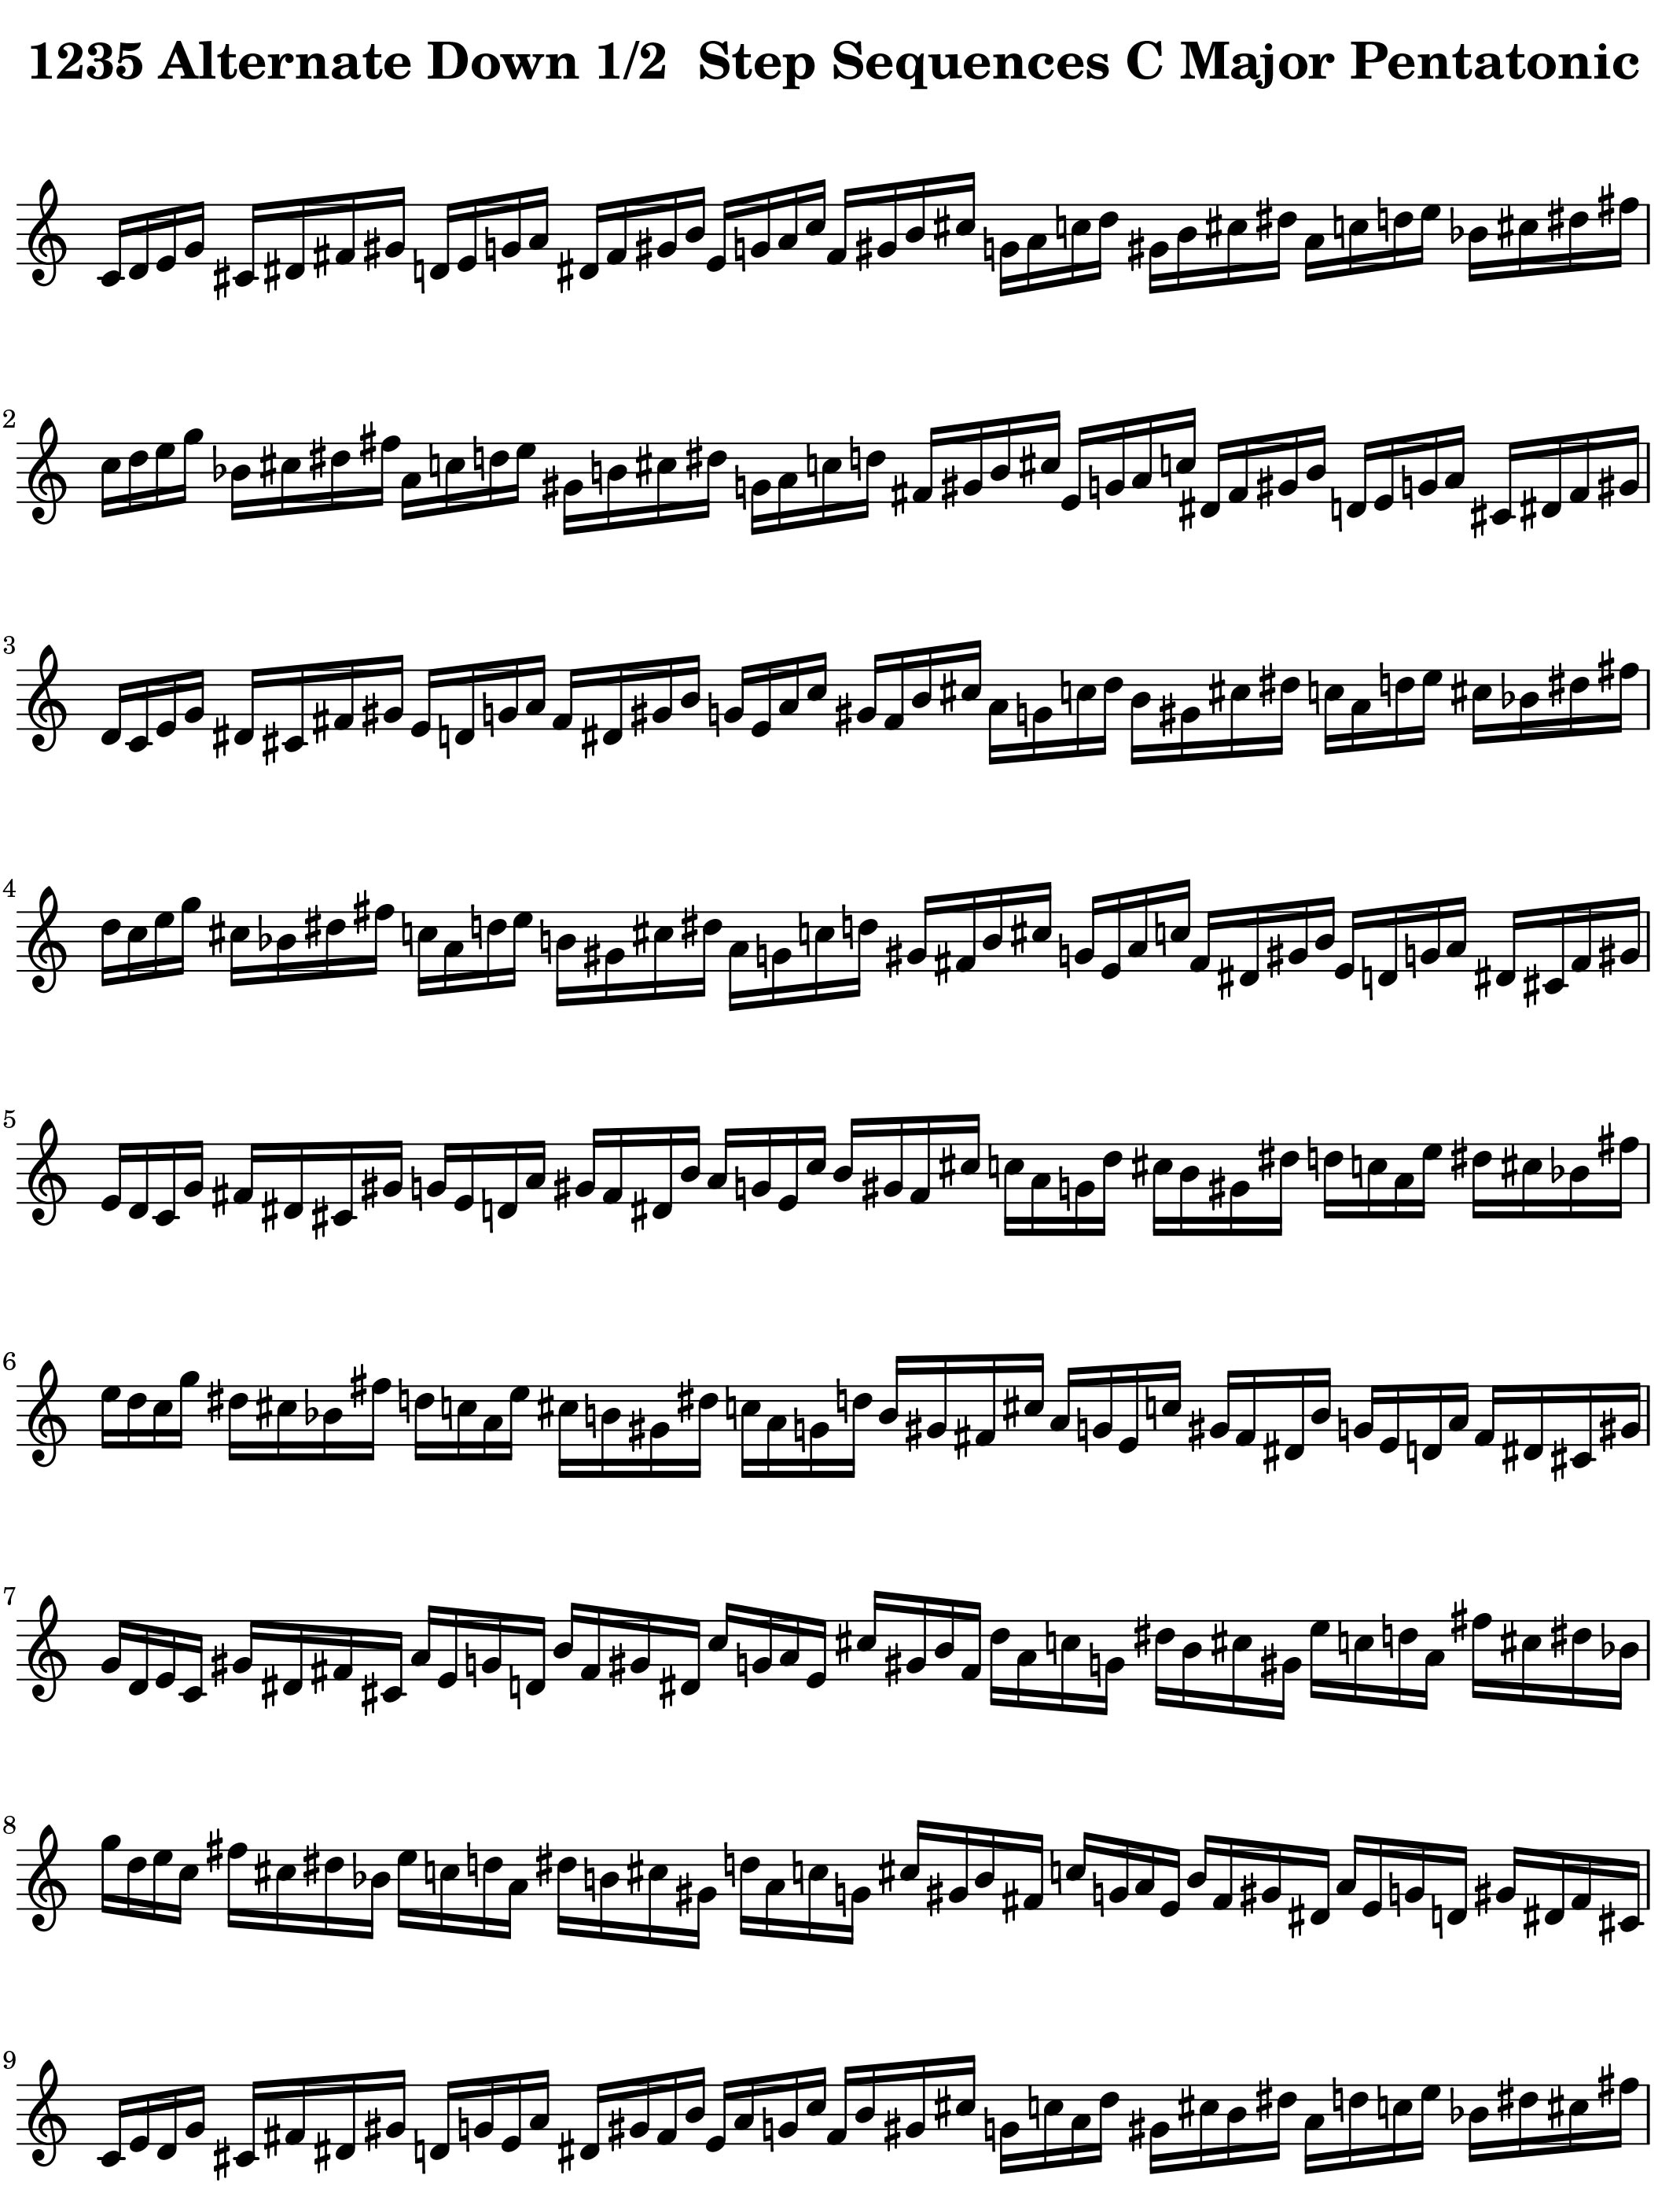 Four Note Side_Stepping_Down_Half_Step-from-the_Modal_Sequence_for__C_Major-Pentatonic-from-the-Pentatonic Scale Lexicon-V1-Major by Bruce Arnold for Muse Eek Publishing